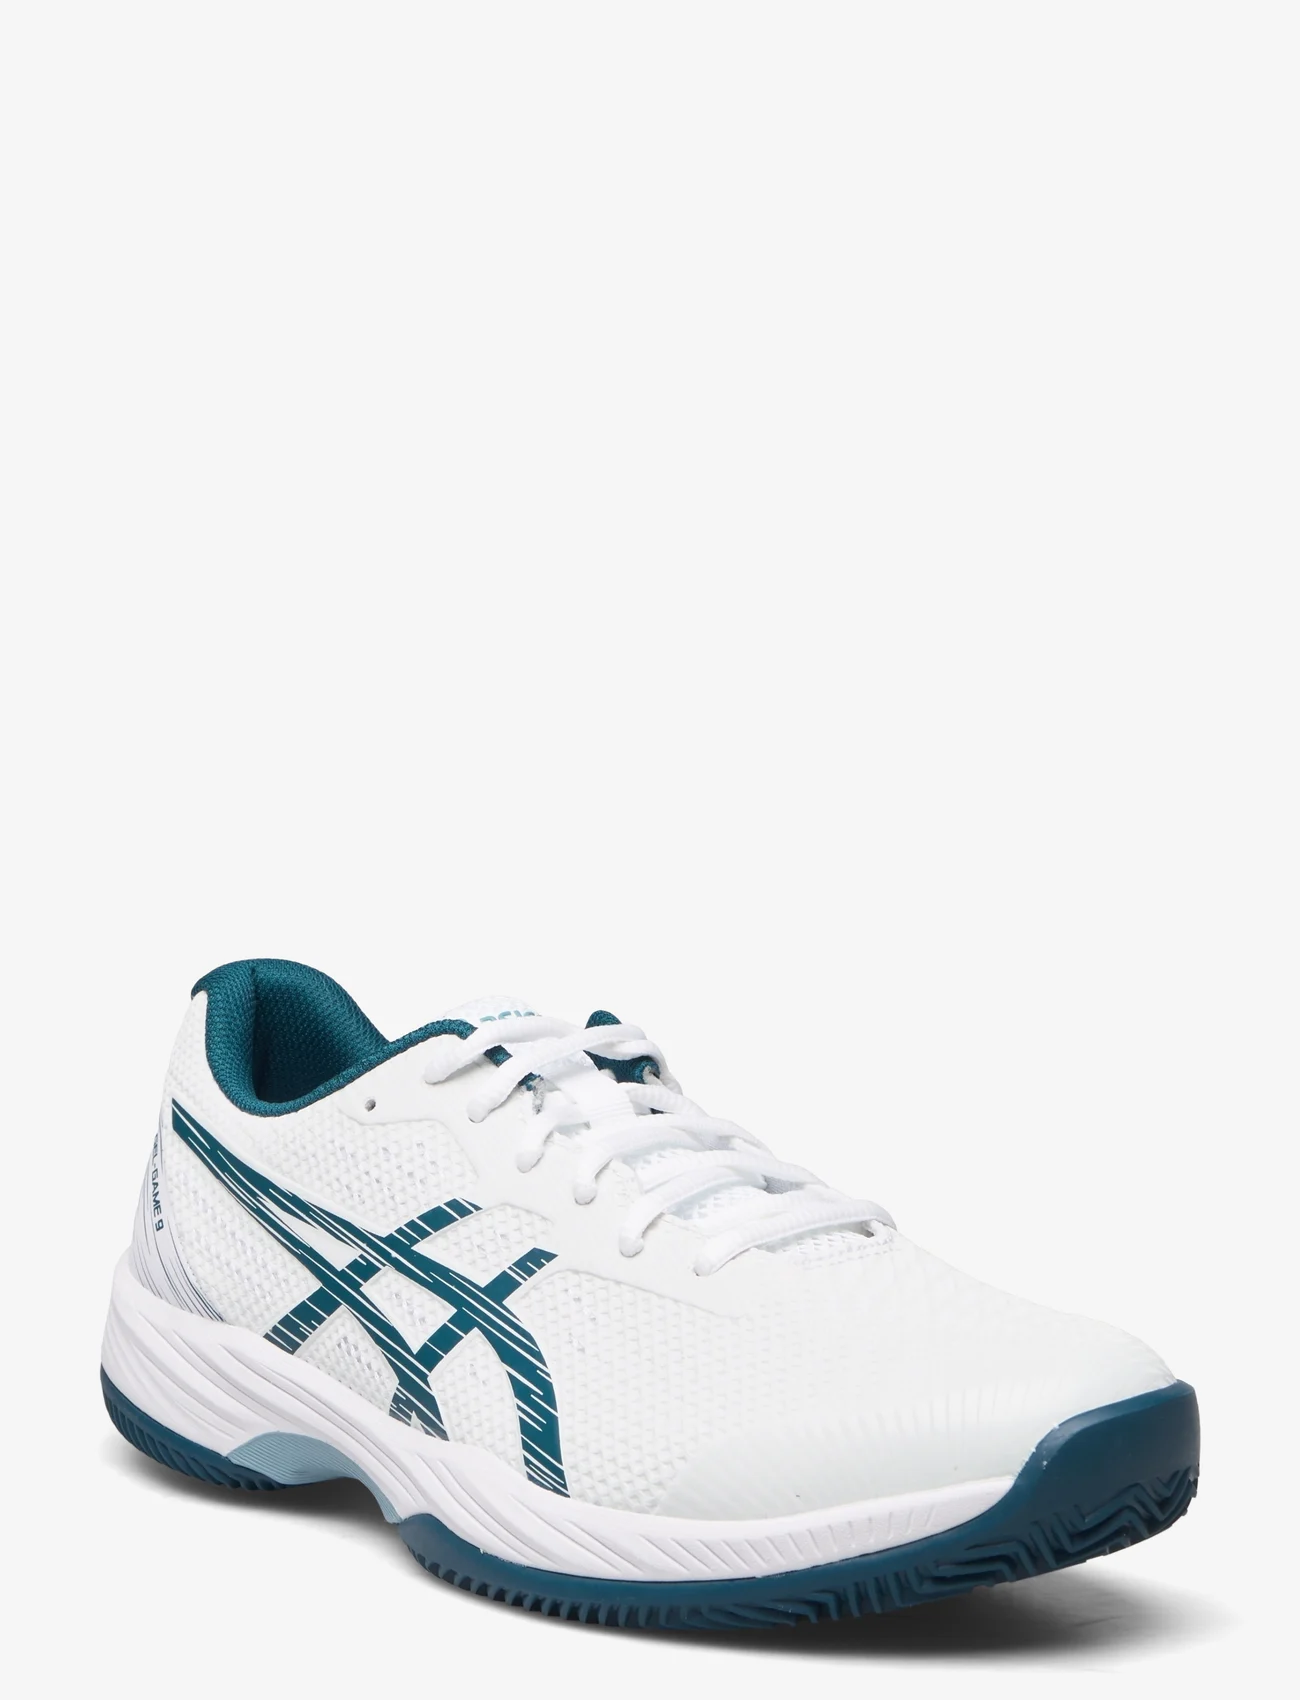 Asics - GEL-GAME 9 CLAY/OC - white/restful teal - 0